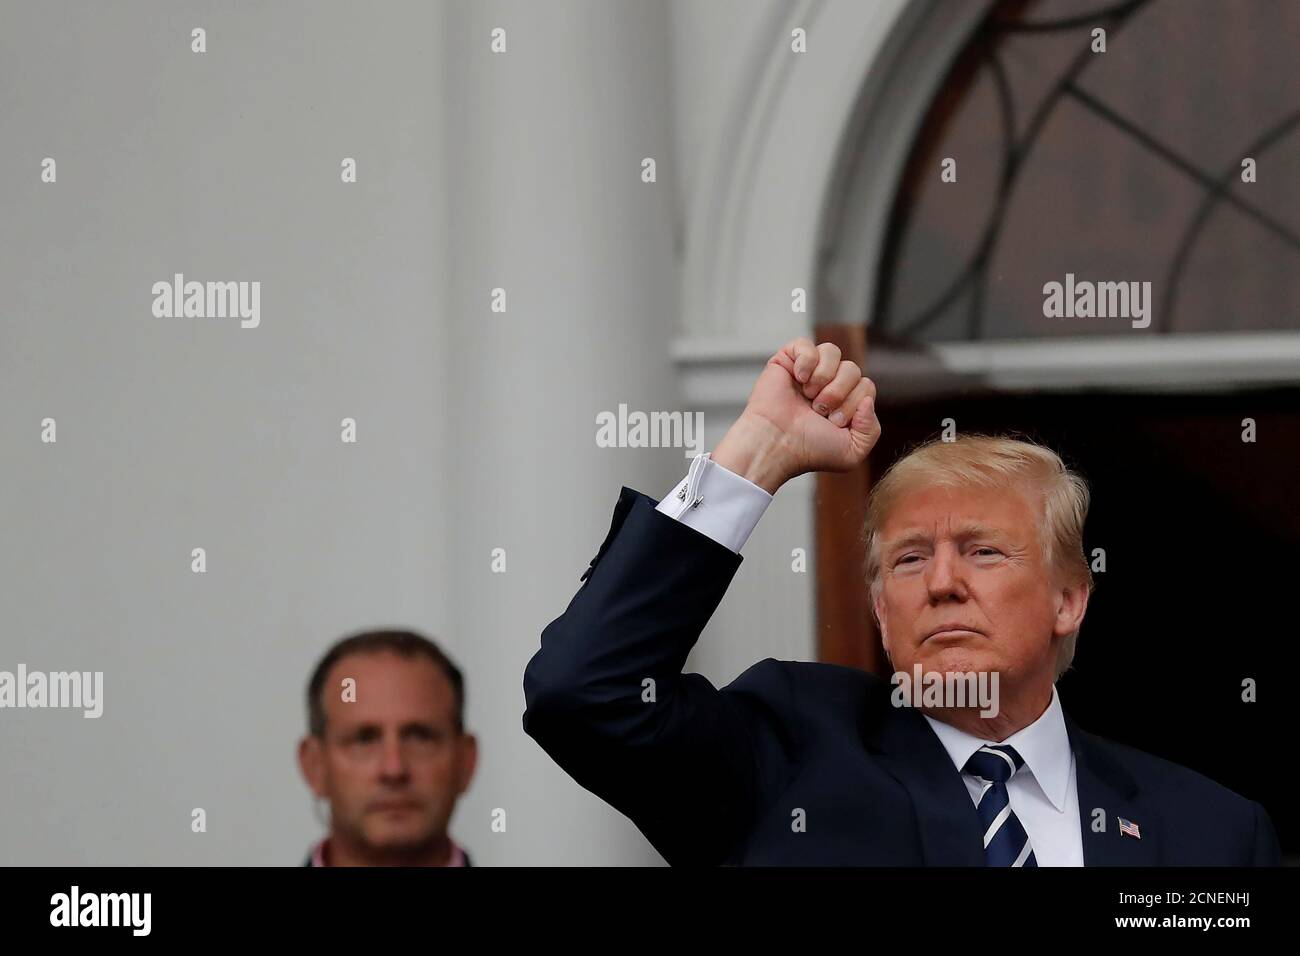 U.S. President Donald Trump reacts as he meets with supporters from a group called 'Bikers for Trump' at the Trump National Golf Club in Bedminster, New Jersey, U.S., August 11, 2018. REUTERS/Carlos Barria Stock Photo